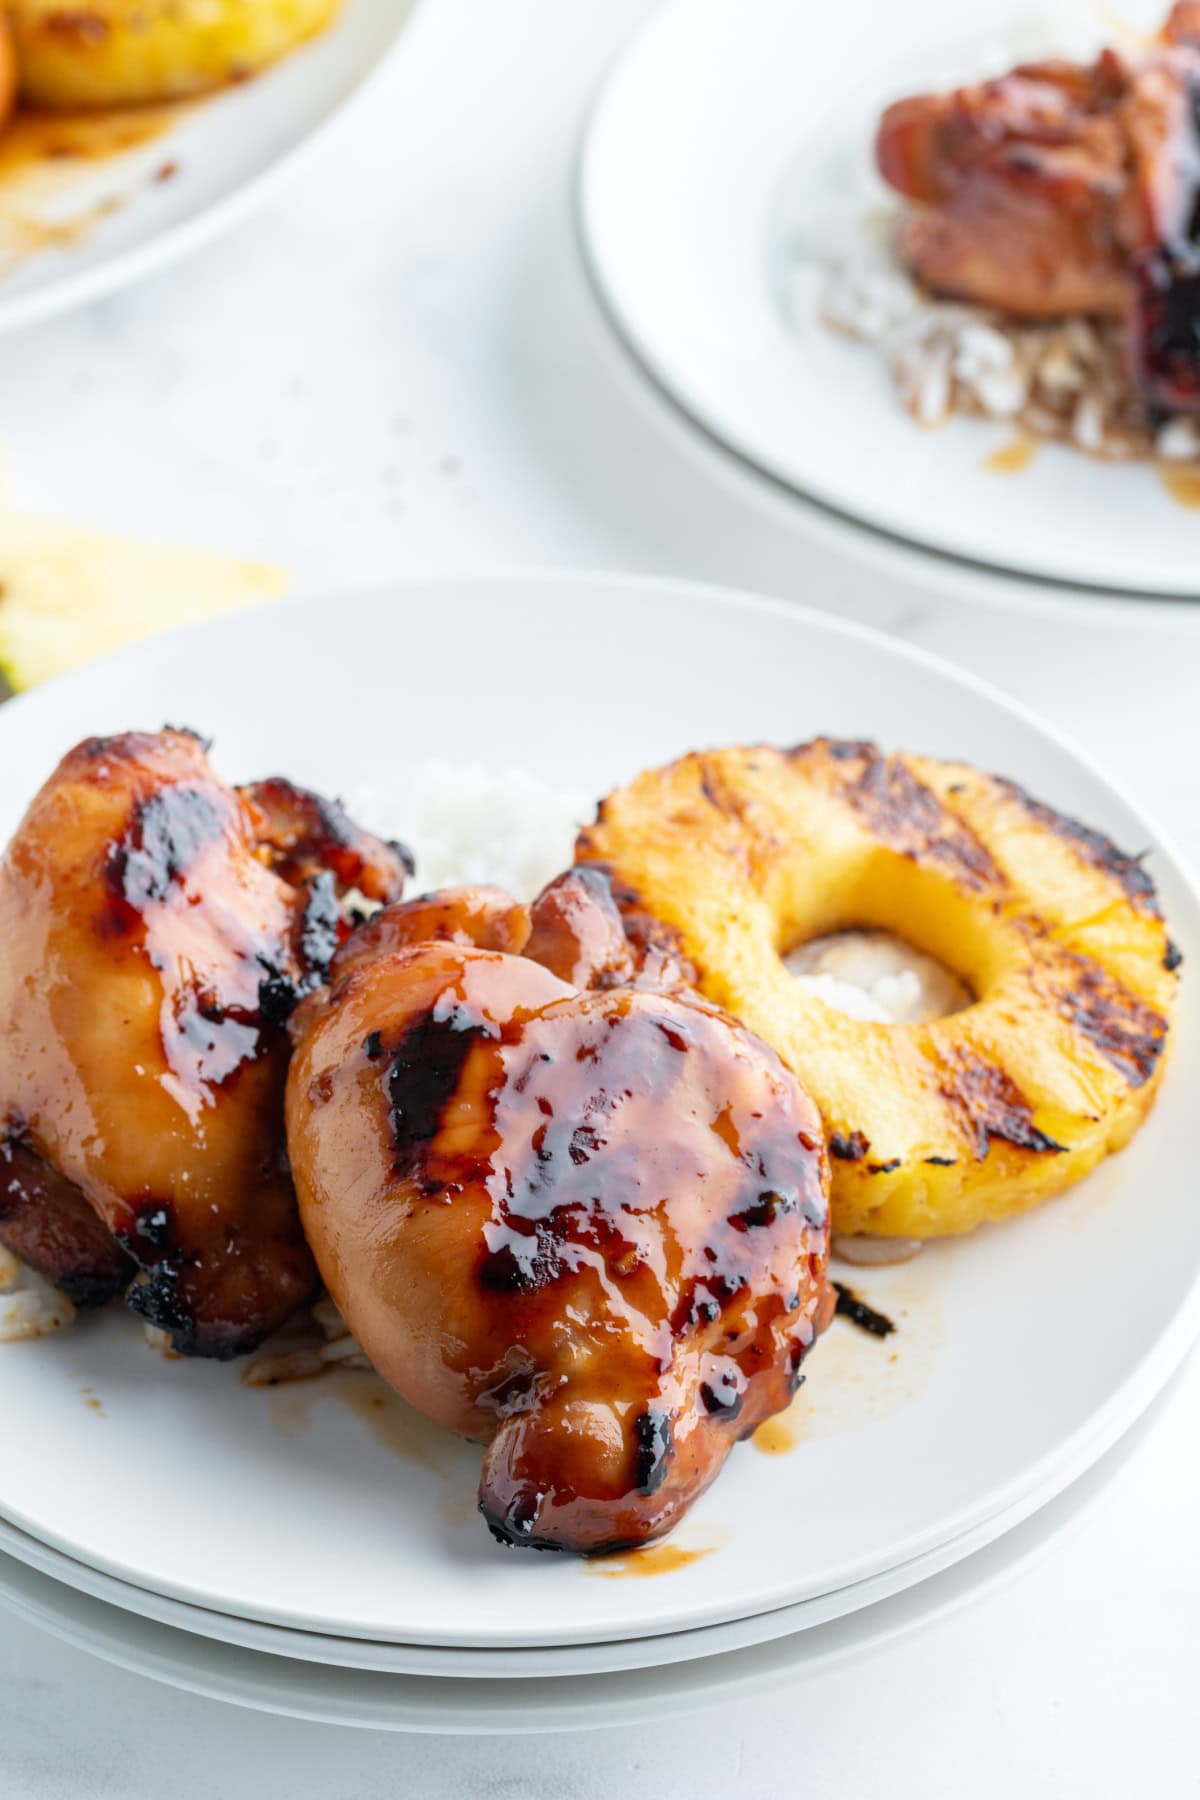 two pieces of grilled huli huli chicken on plate with pineapple